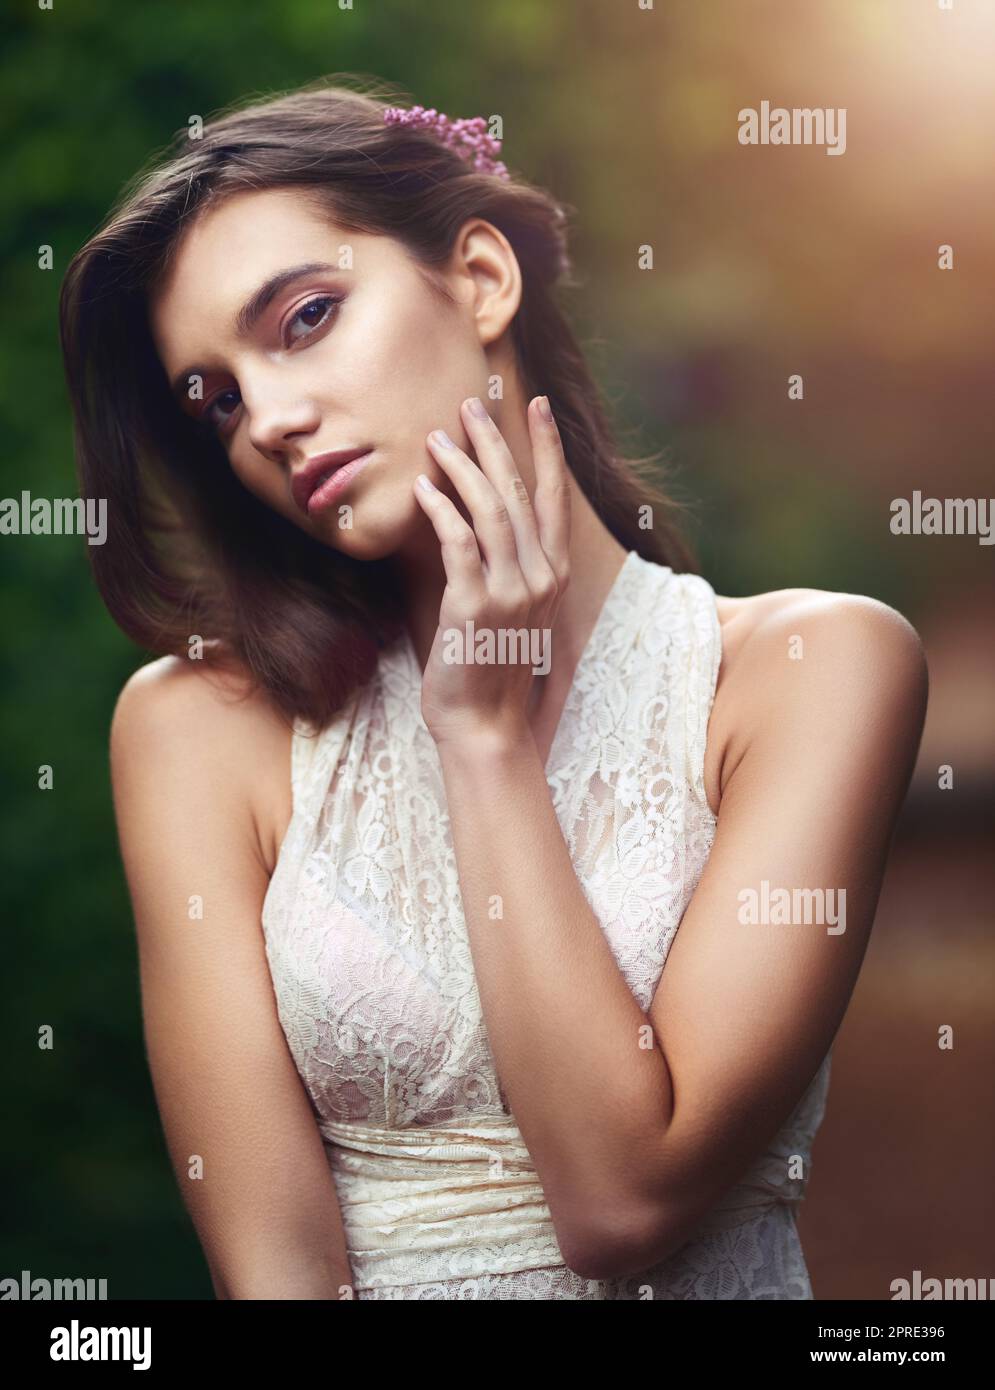 Flaunt your femininity. a beautiful young woman posing in nature. Stock Photo